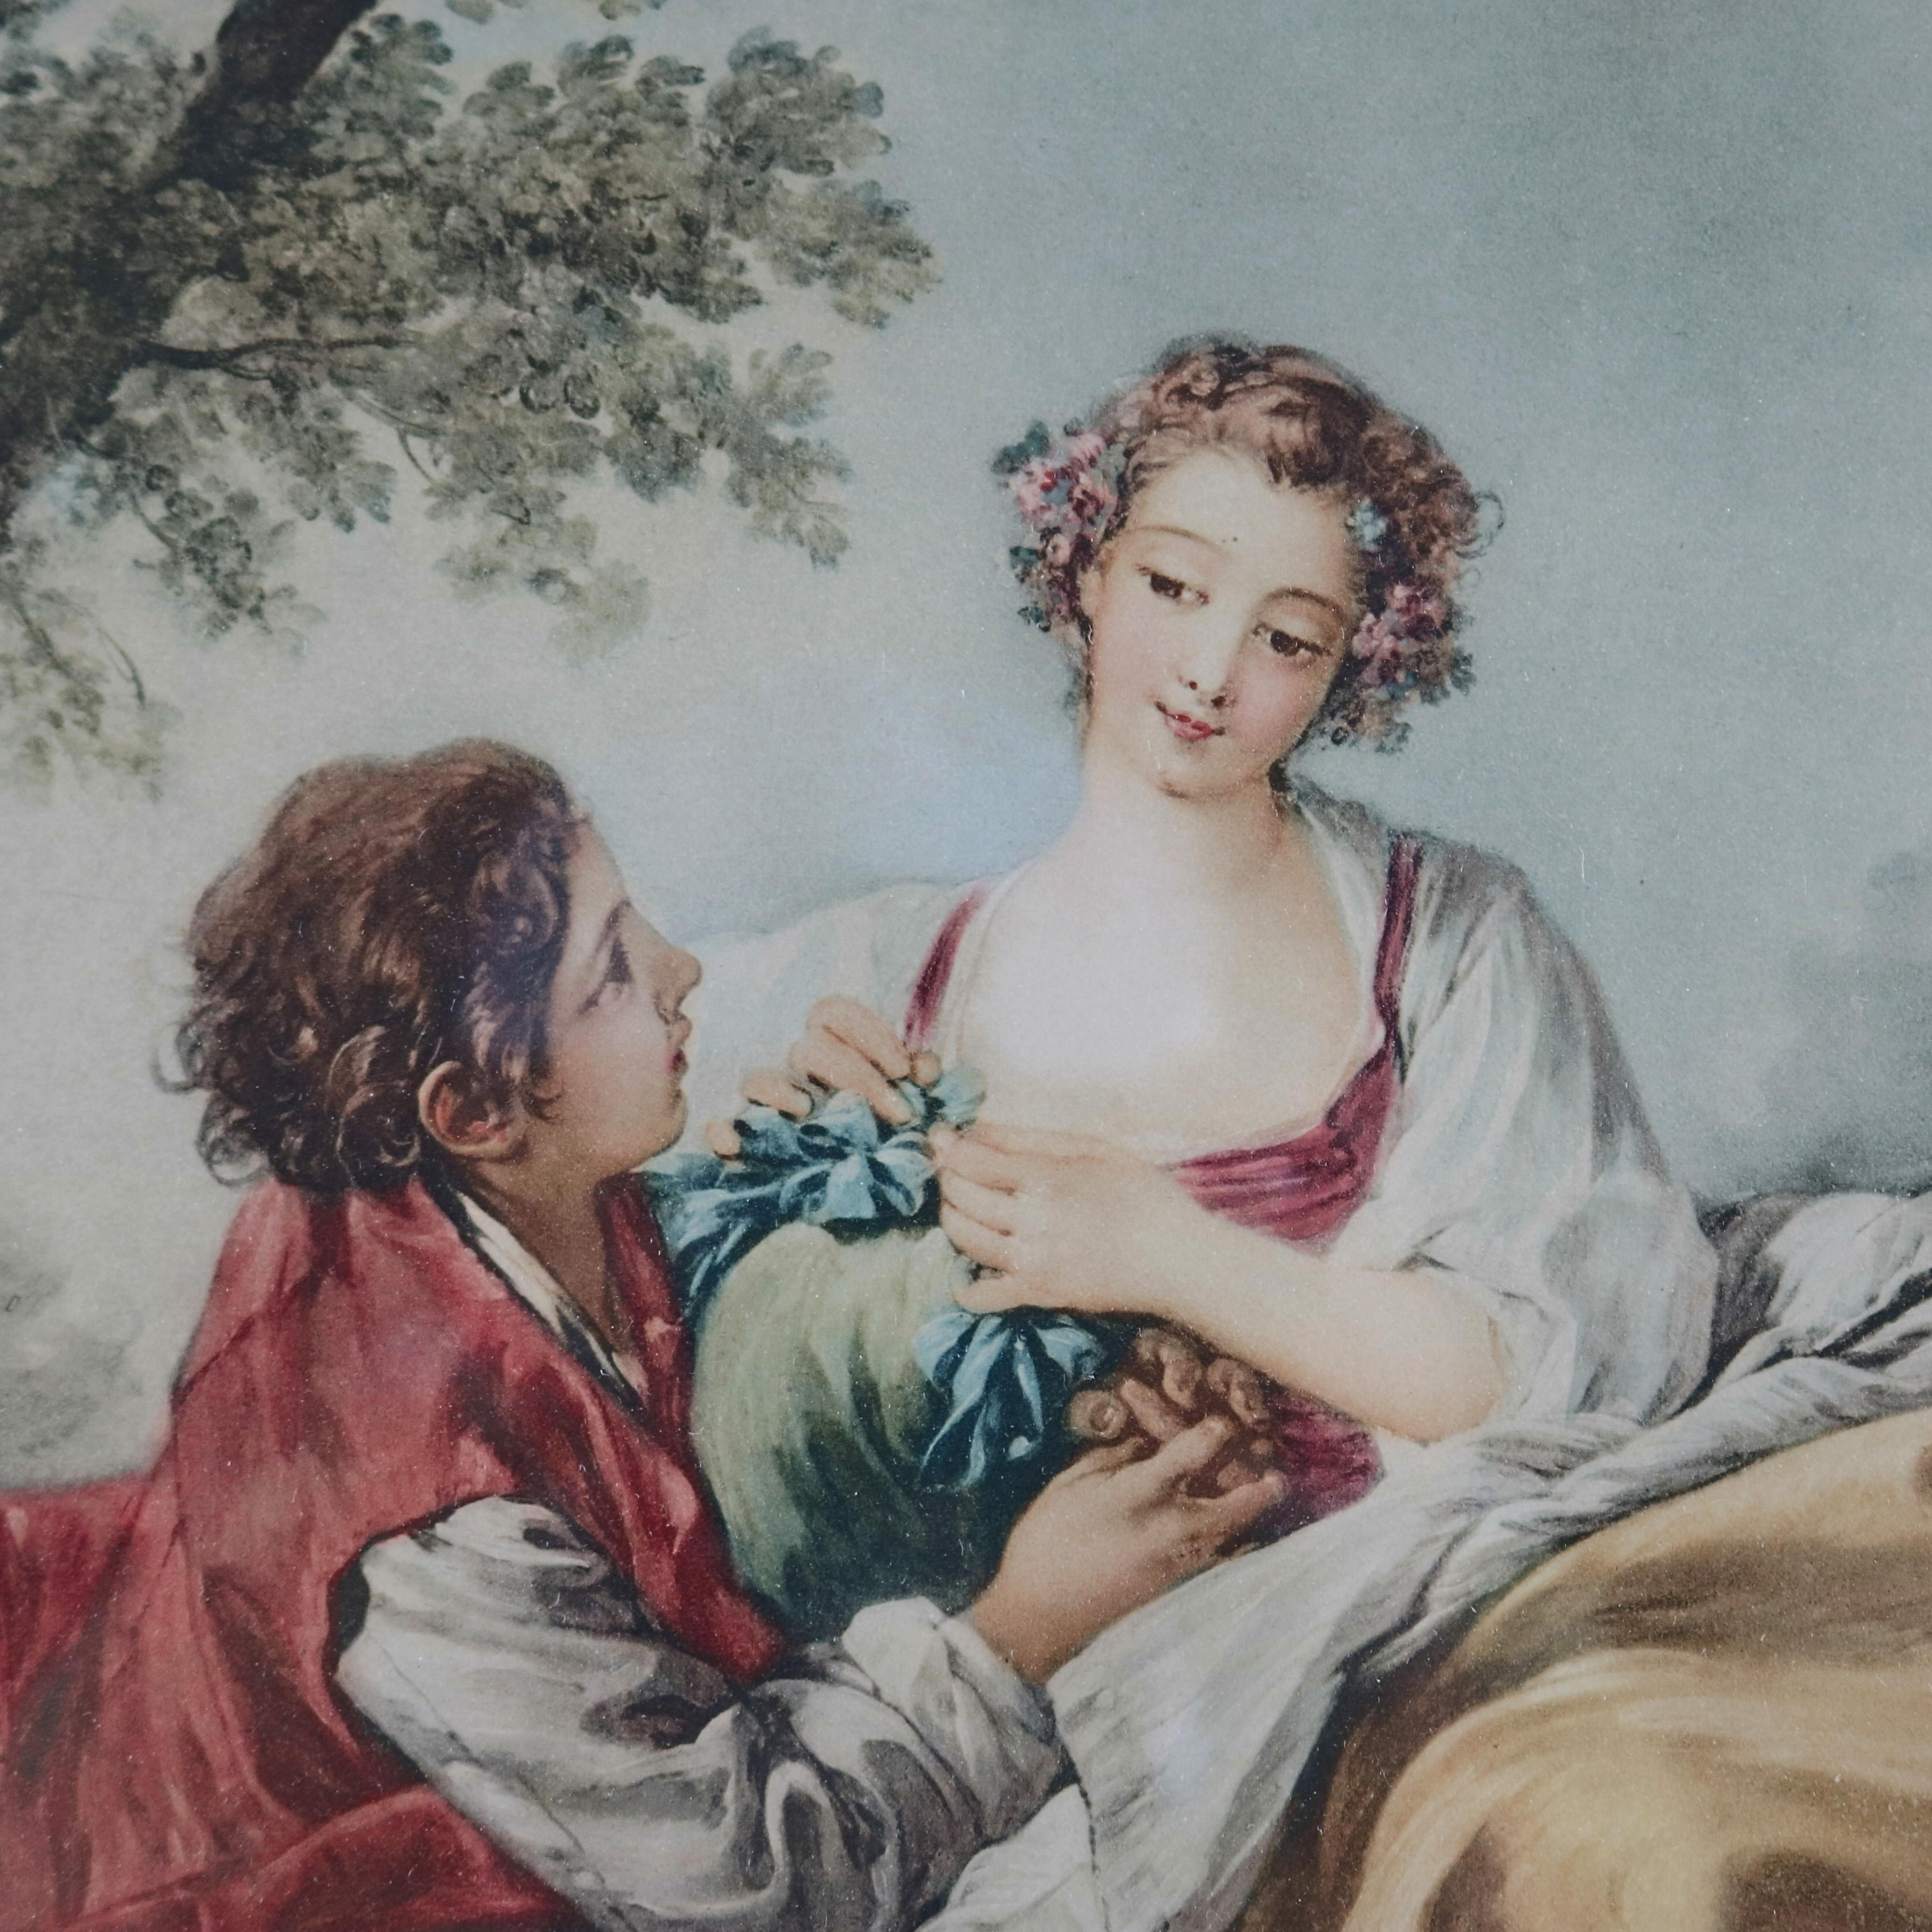 A large French print of La Musette after Boucher François depicts courting scene in countryside setting, framed and matted, 20th century

Measures - 24